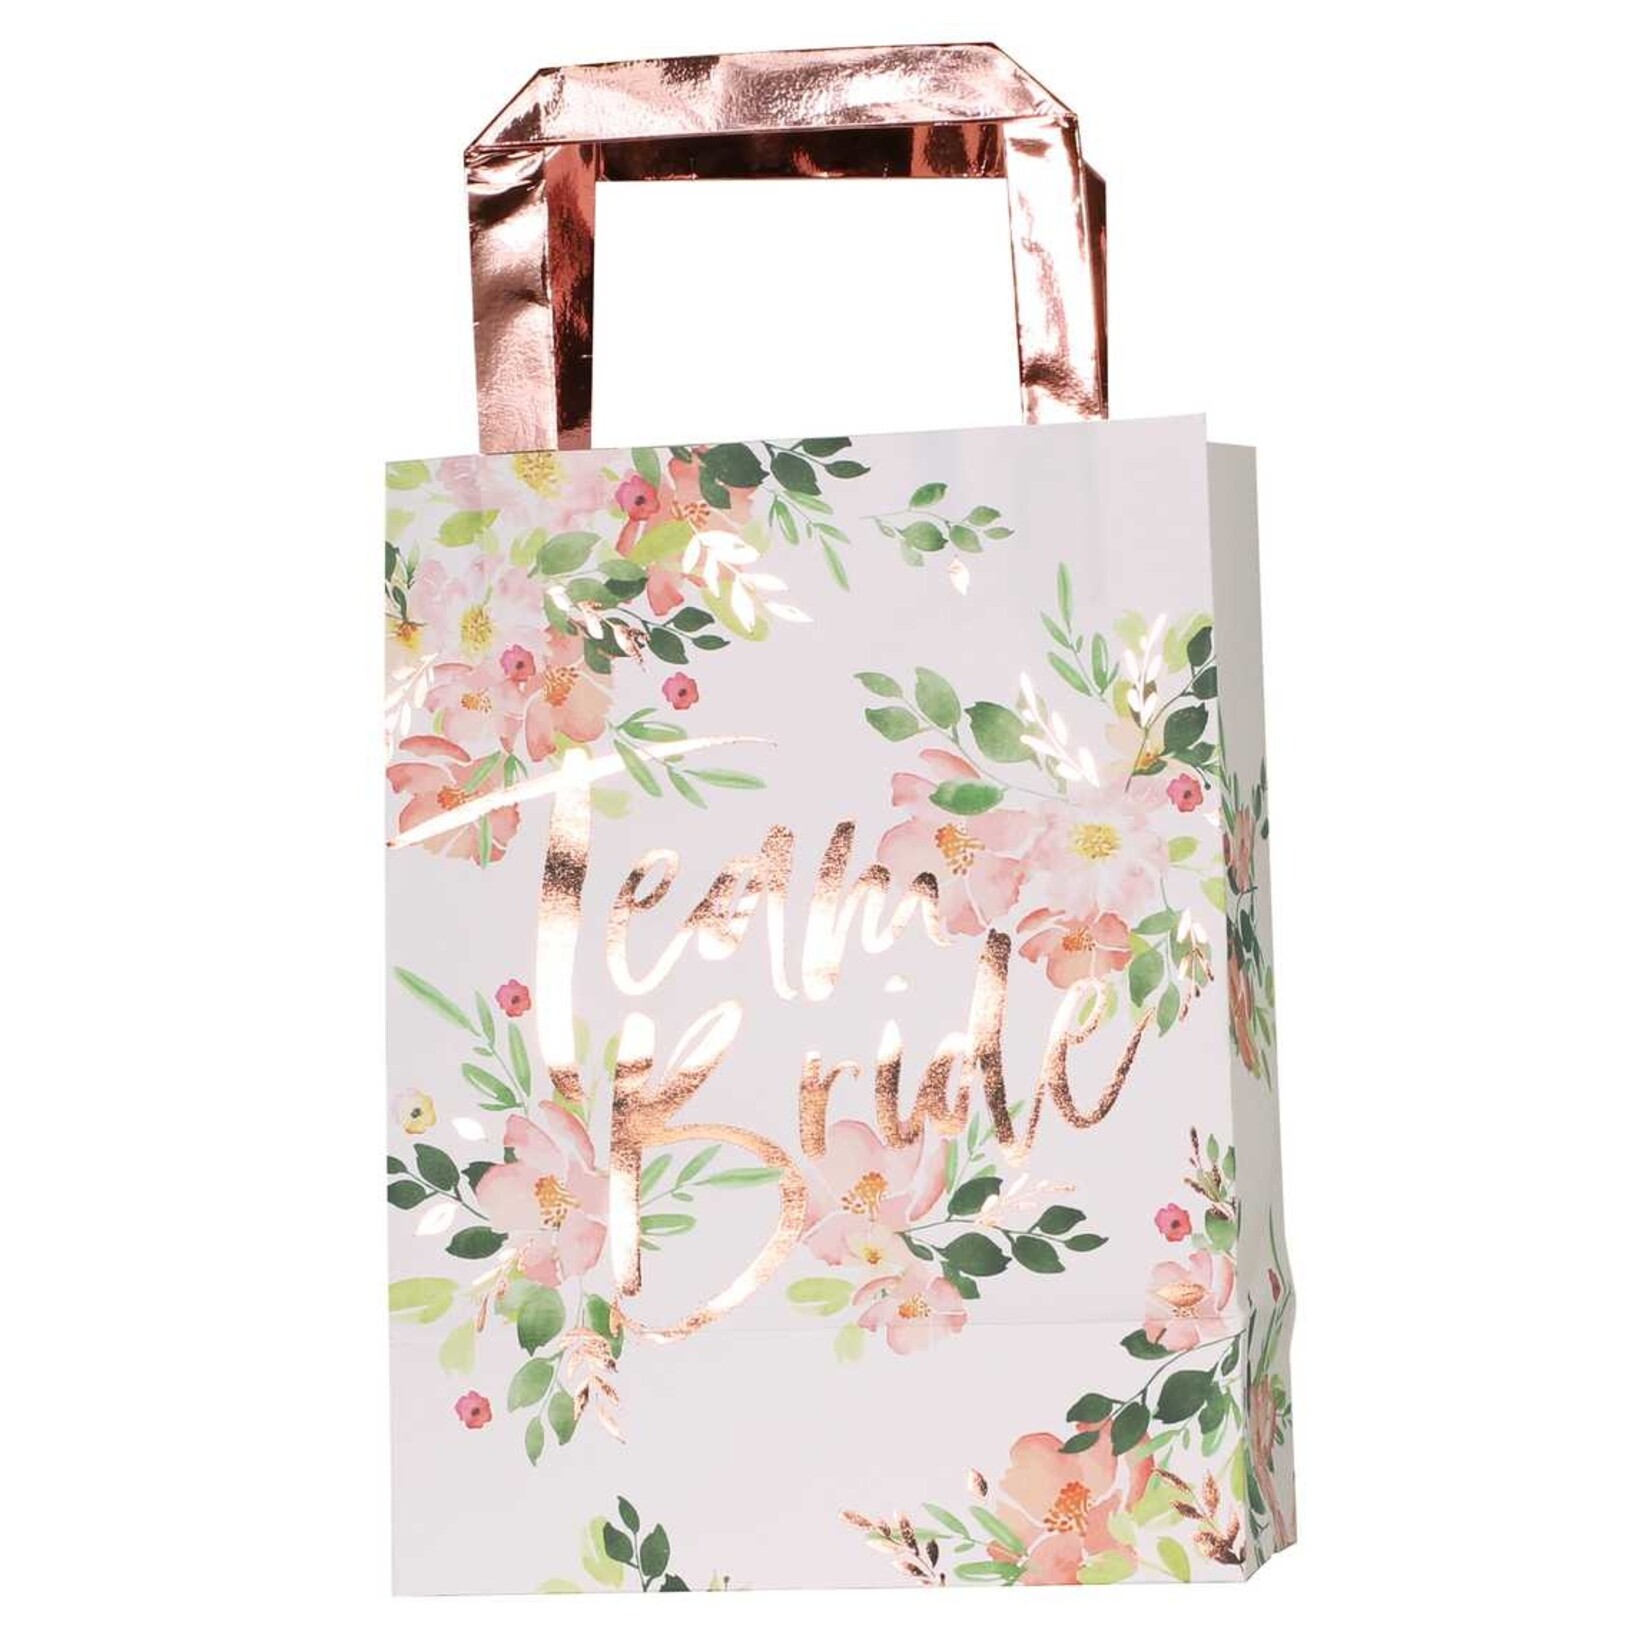 GINGERRAY Floral Team Bride Hen Party Bags